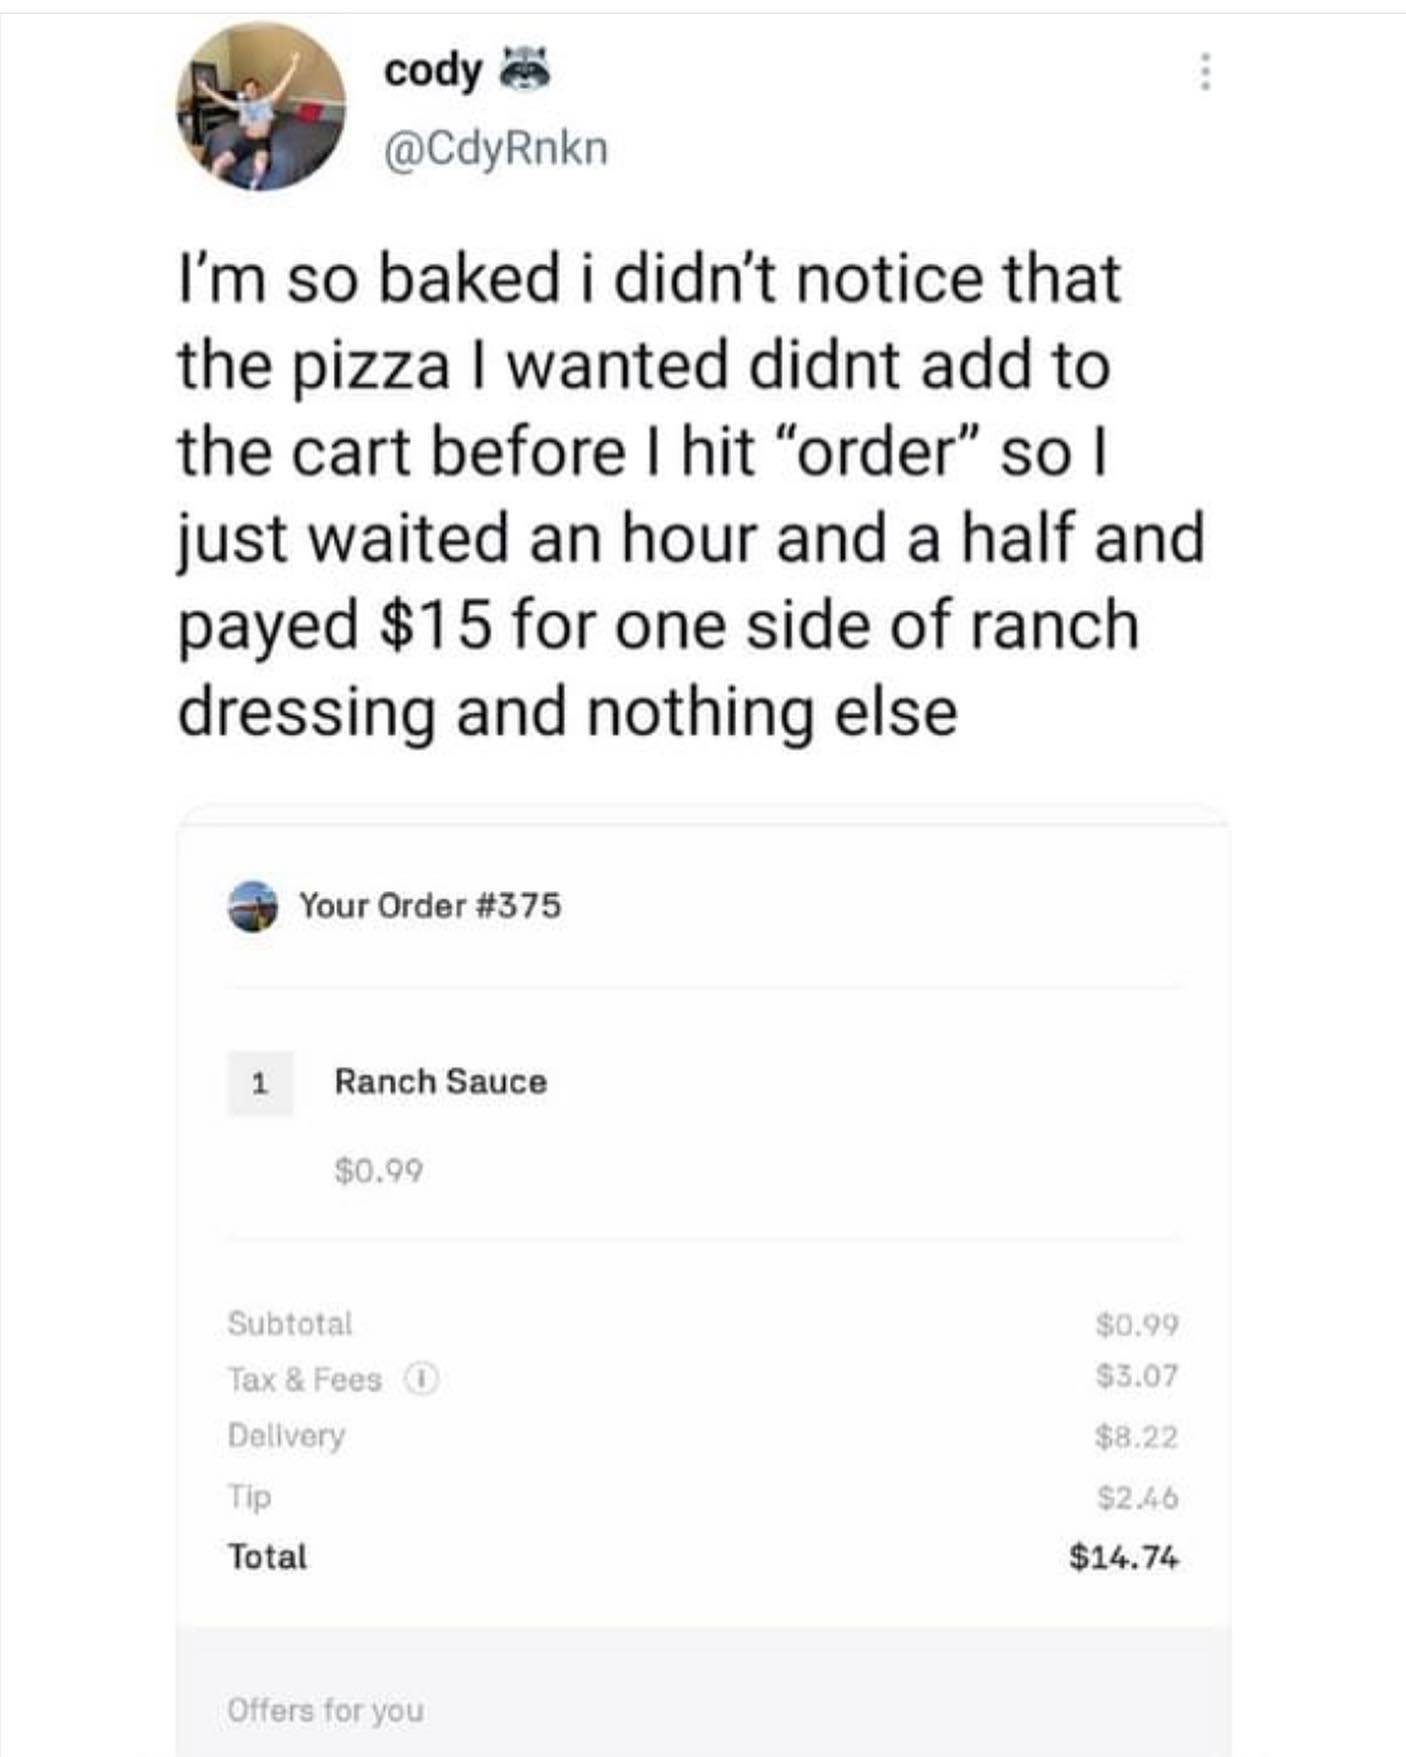 document - cody I'm so baked i didn't notice that the pizza I wanted didnt add to the cart before I hit "order" so I just waited an hour and a half and payed $15 for one side of ranch dressing and nothing else Your Order 1 Ranch Sauce $0.99 $0.99 $3.07 Su